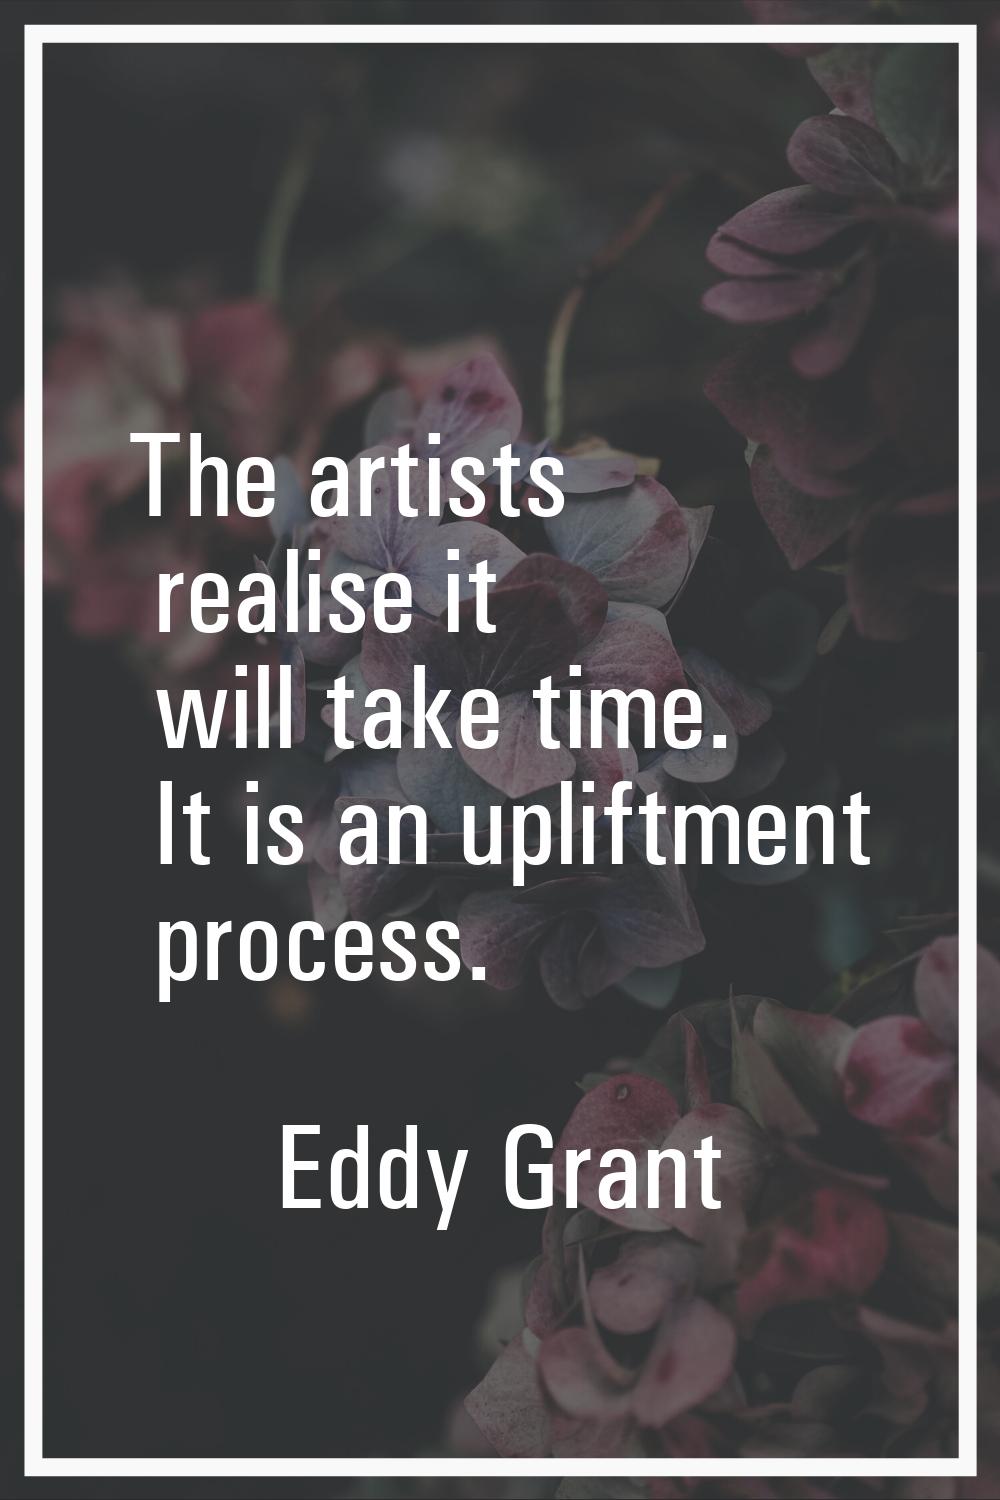 The artists realise it will take time. It is an upliftment process.